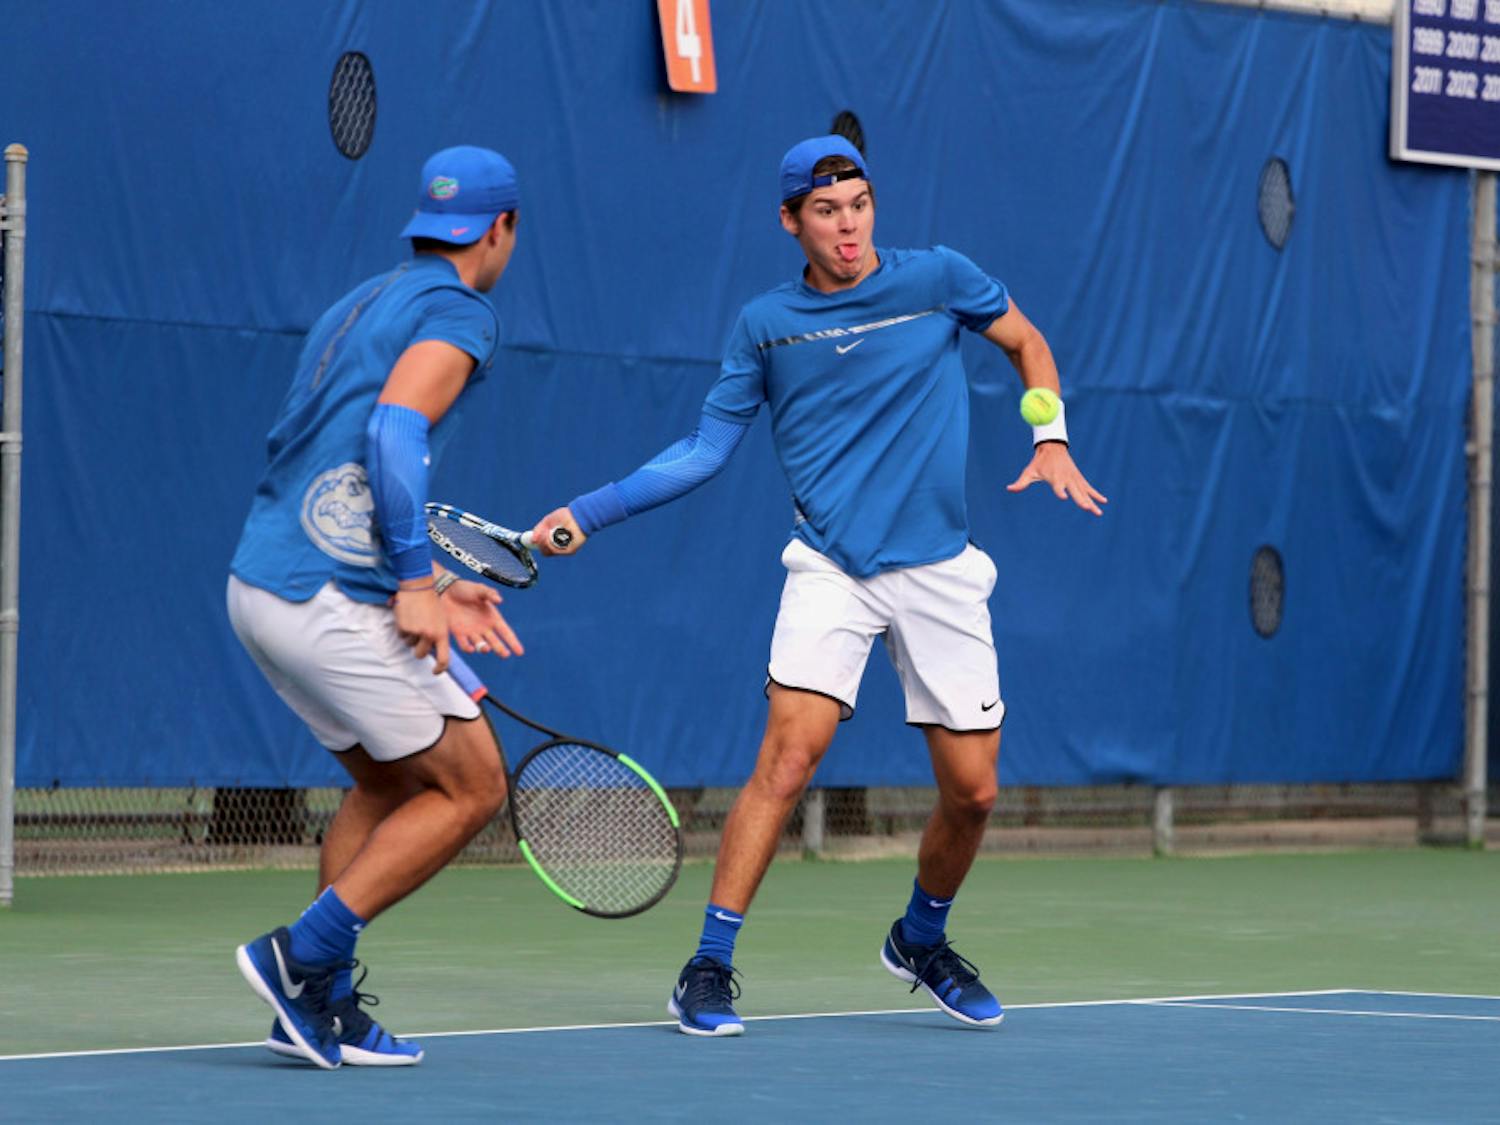 Duarte Vale and McClain Kessler helped set the pace with a doubles win in Florida's 6-1 victory over Arkansas on Sunday at the Ring Tennis Complex. “I think those two really complemented themselves nicely today,” coach Bryan Shelton said.